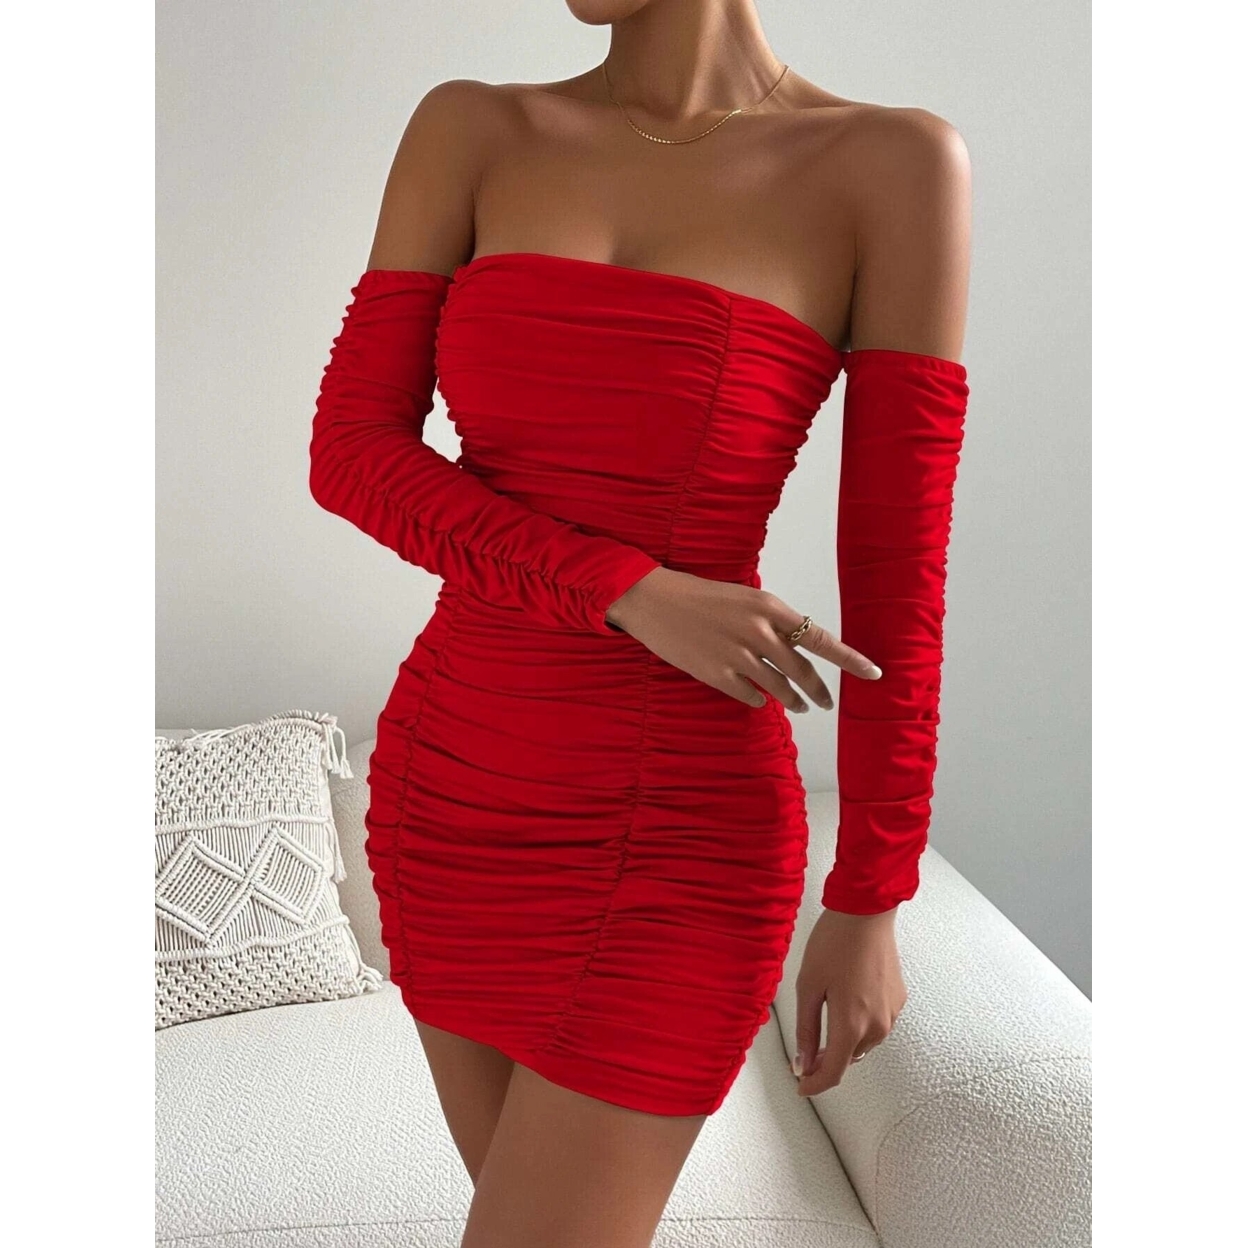 Off Shoulder Ruched Bodycon Dress - Red, Medium(6)